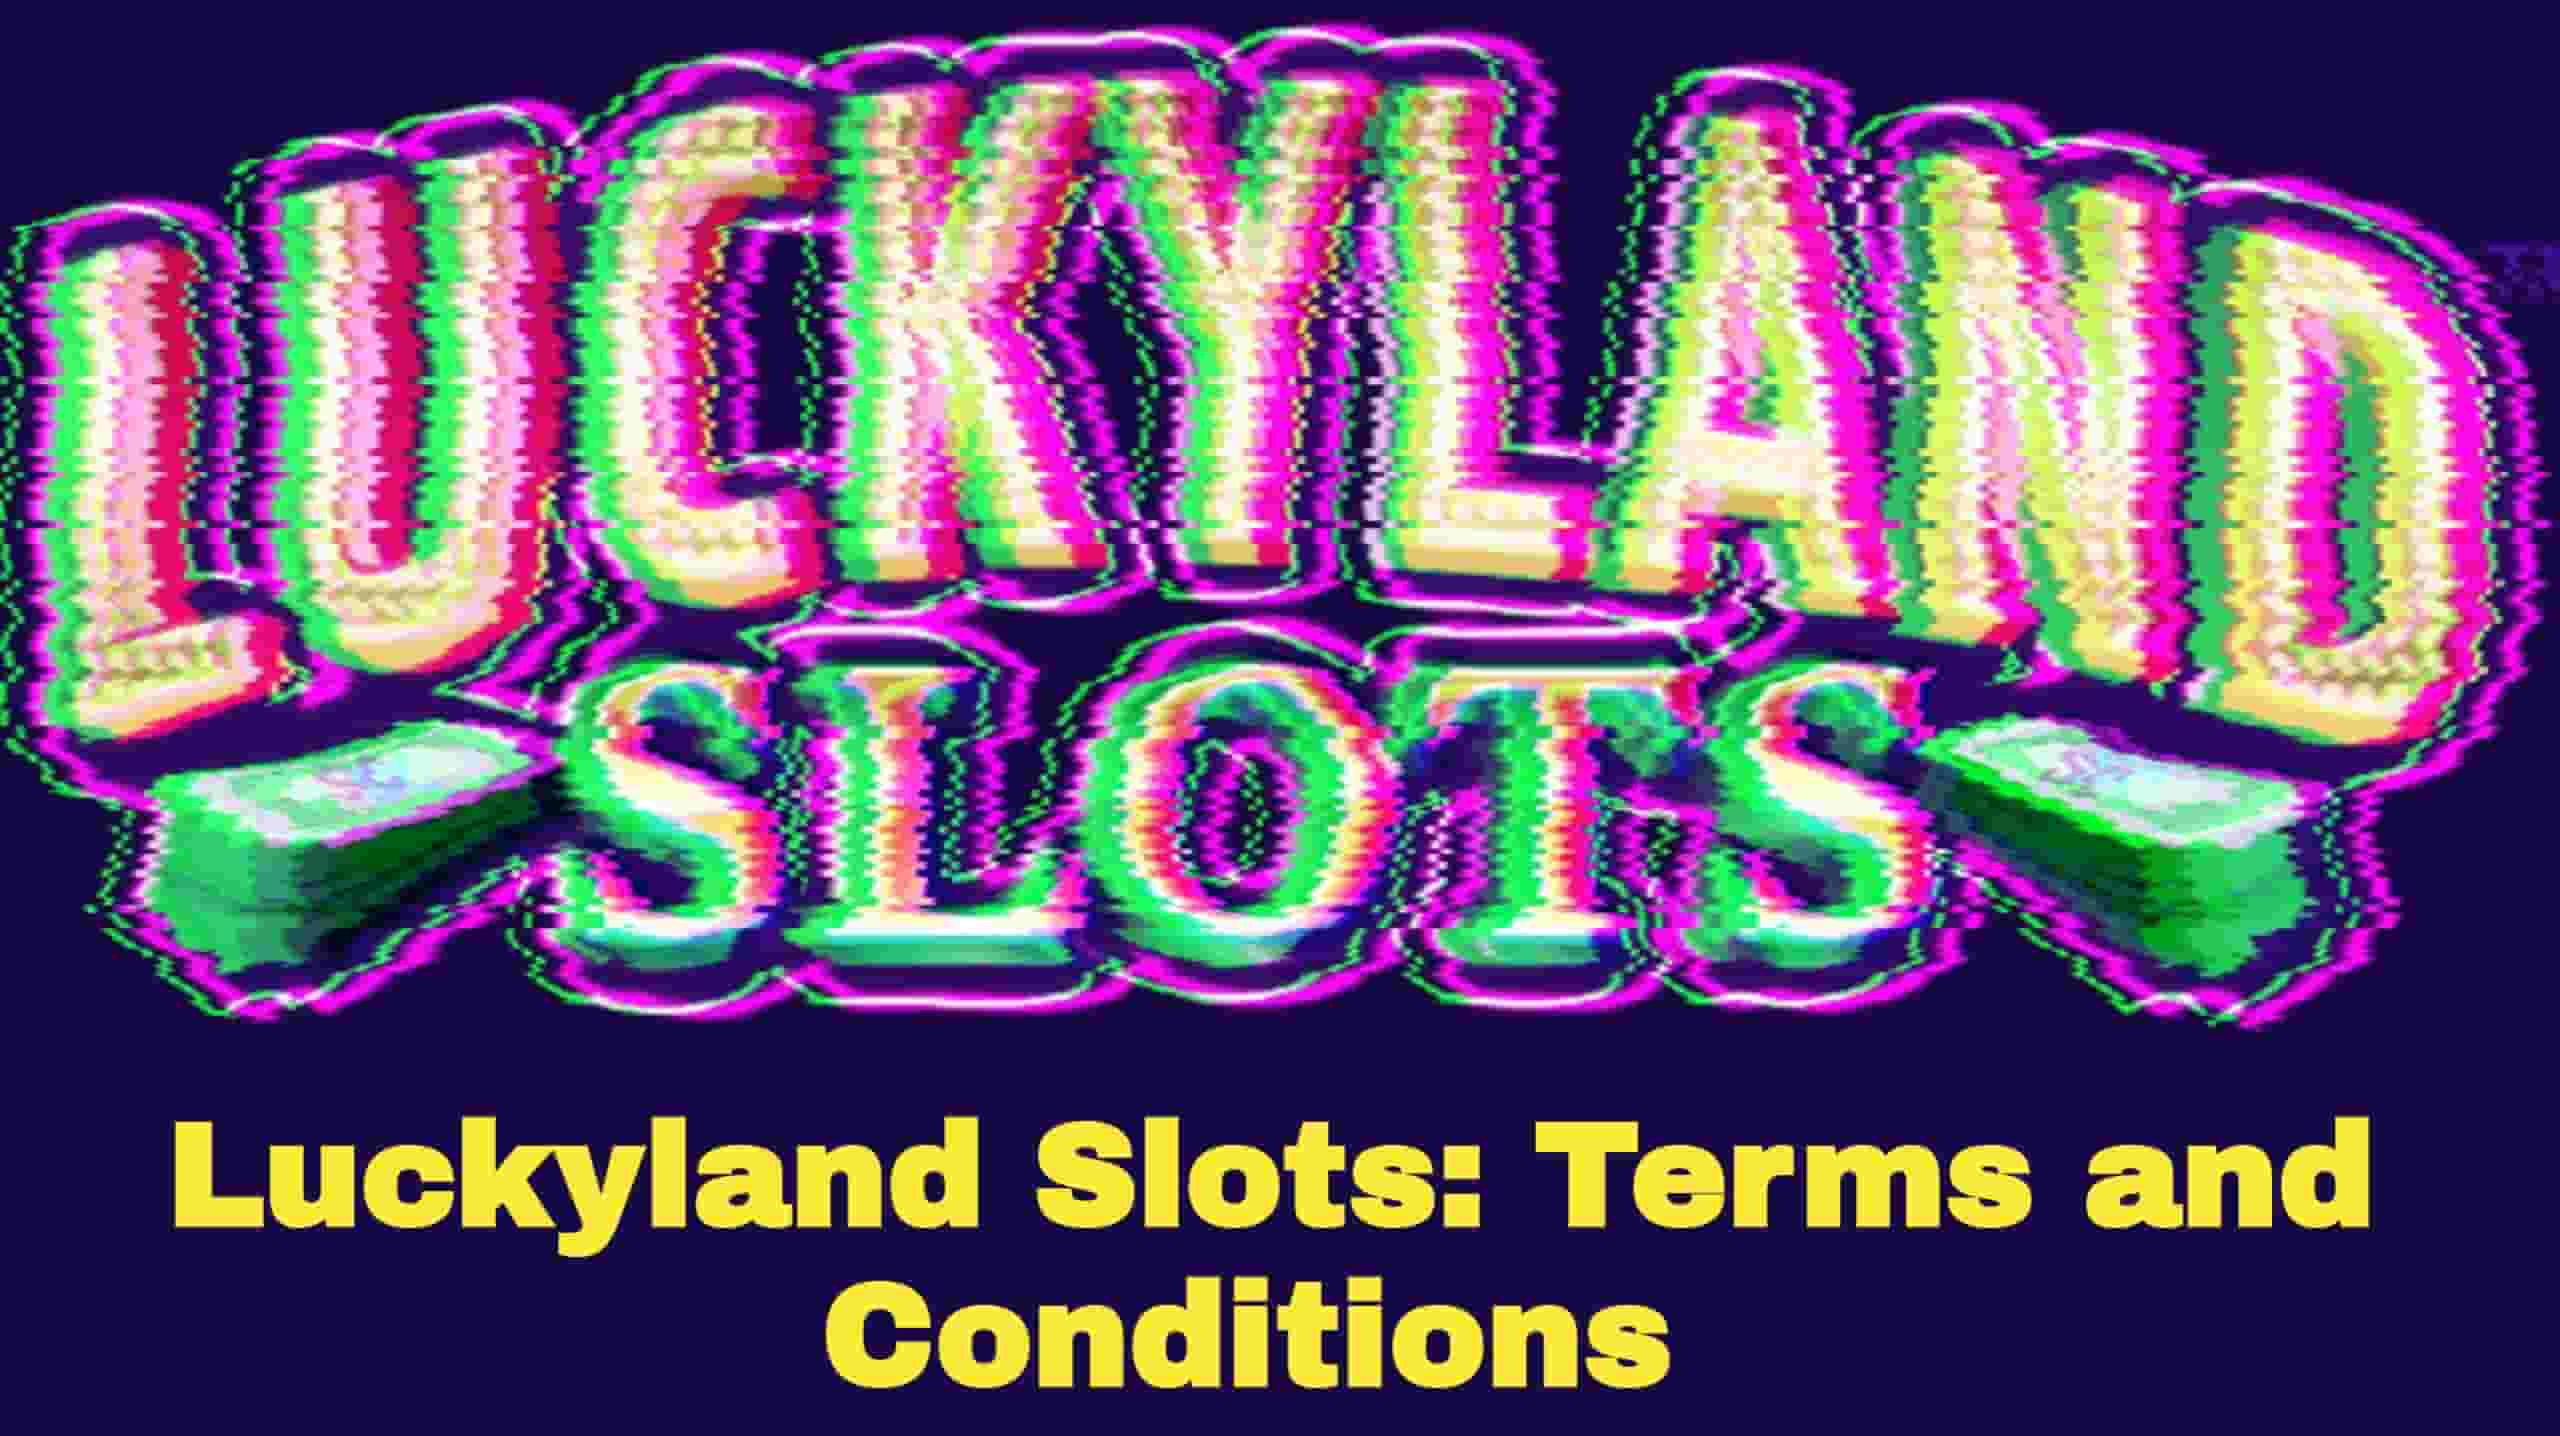 LuckyLand Slots Terms and Conditions